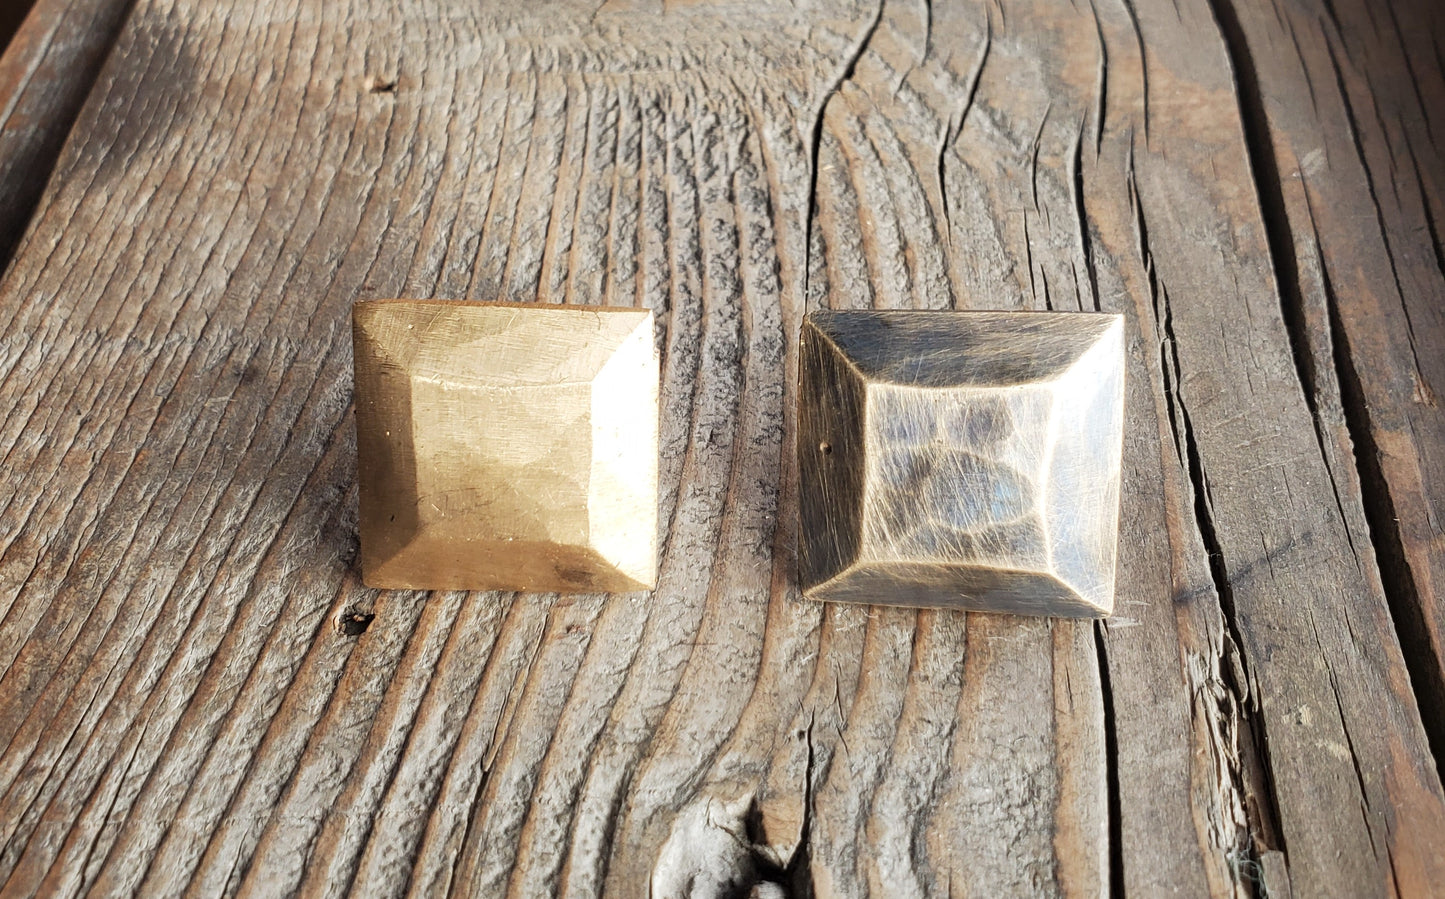 1" Square Plateau Hammered Brass Head Nail